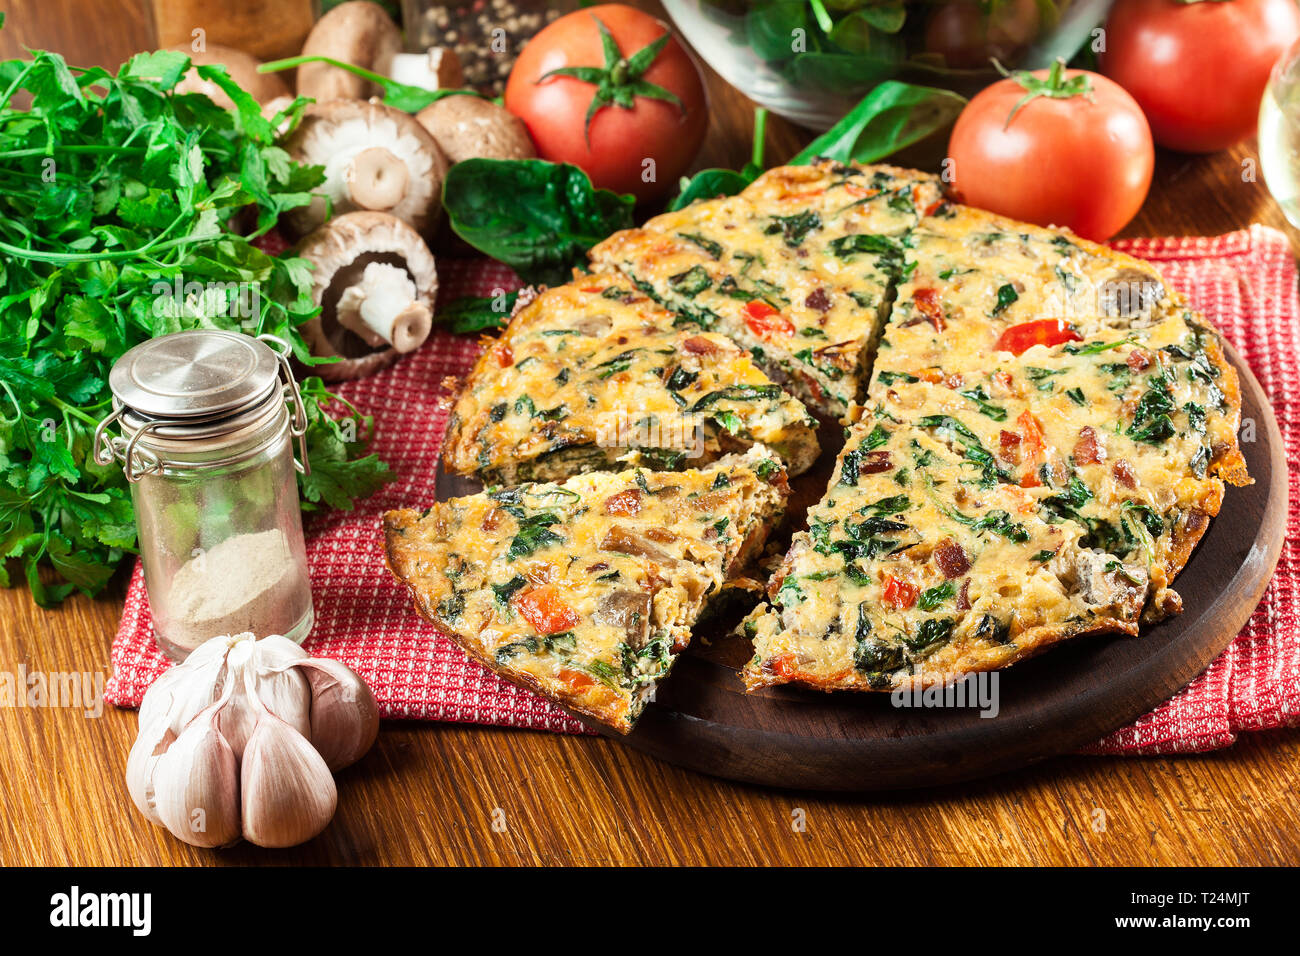 Frittata made of eggs, mushrooms and spinach on a cutting board. Italian cuisine Stock Photo